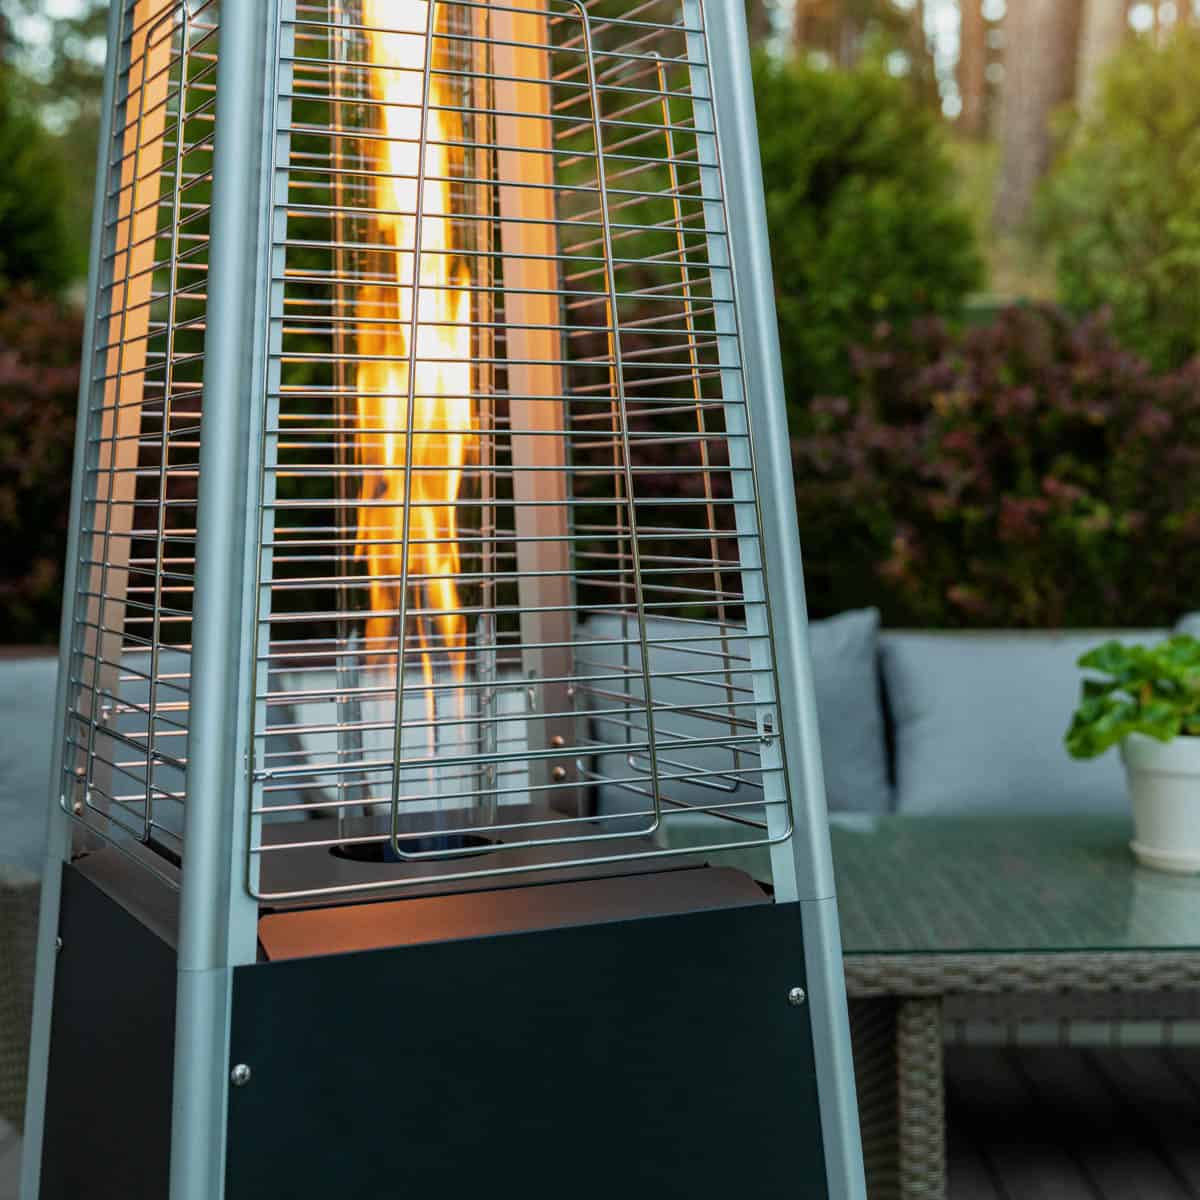 Best Natural Gas Patio Heater on a deck